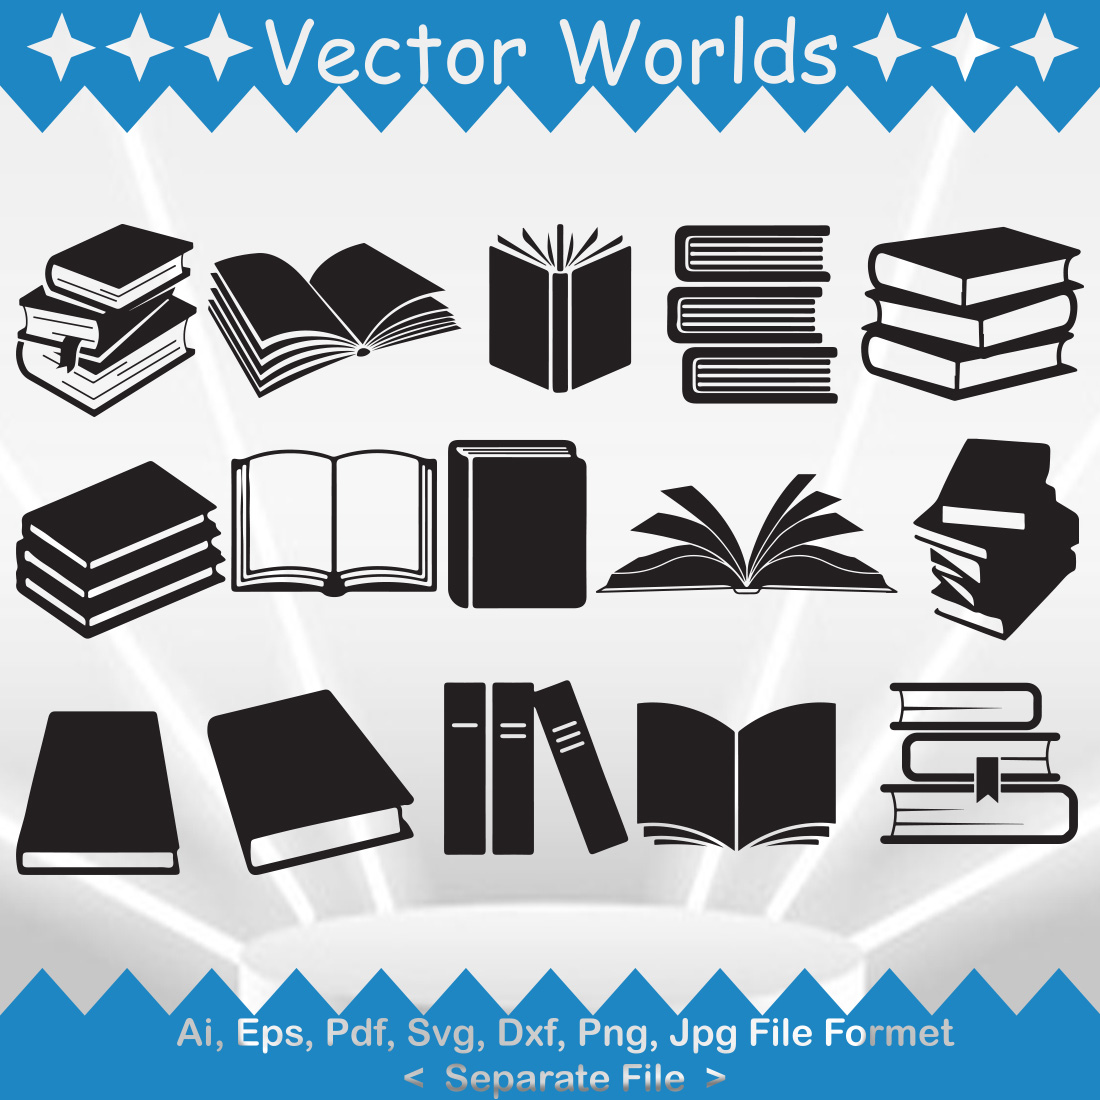 Set of vector beautiful images of books in black color.